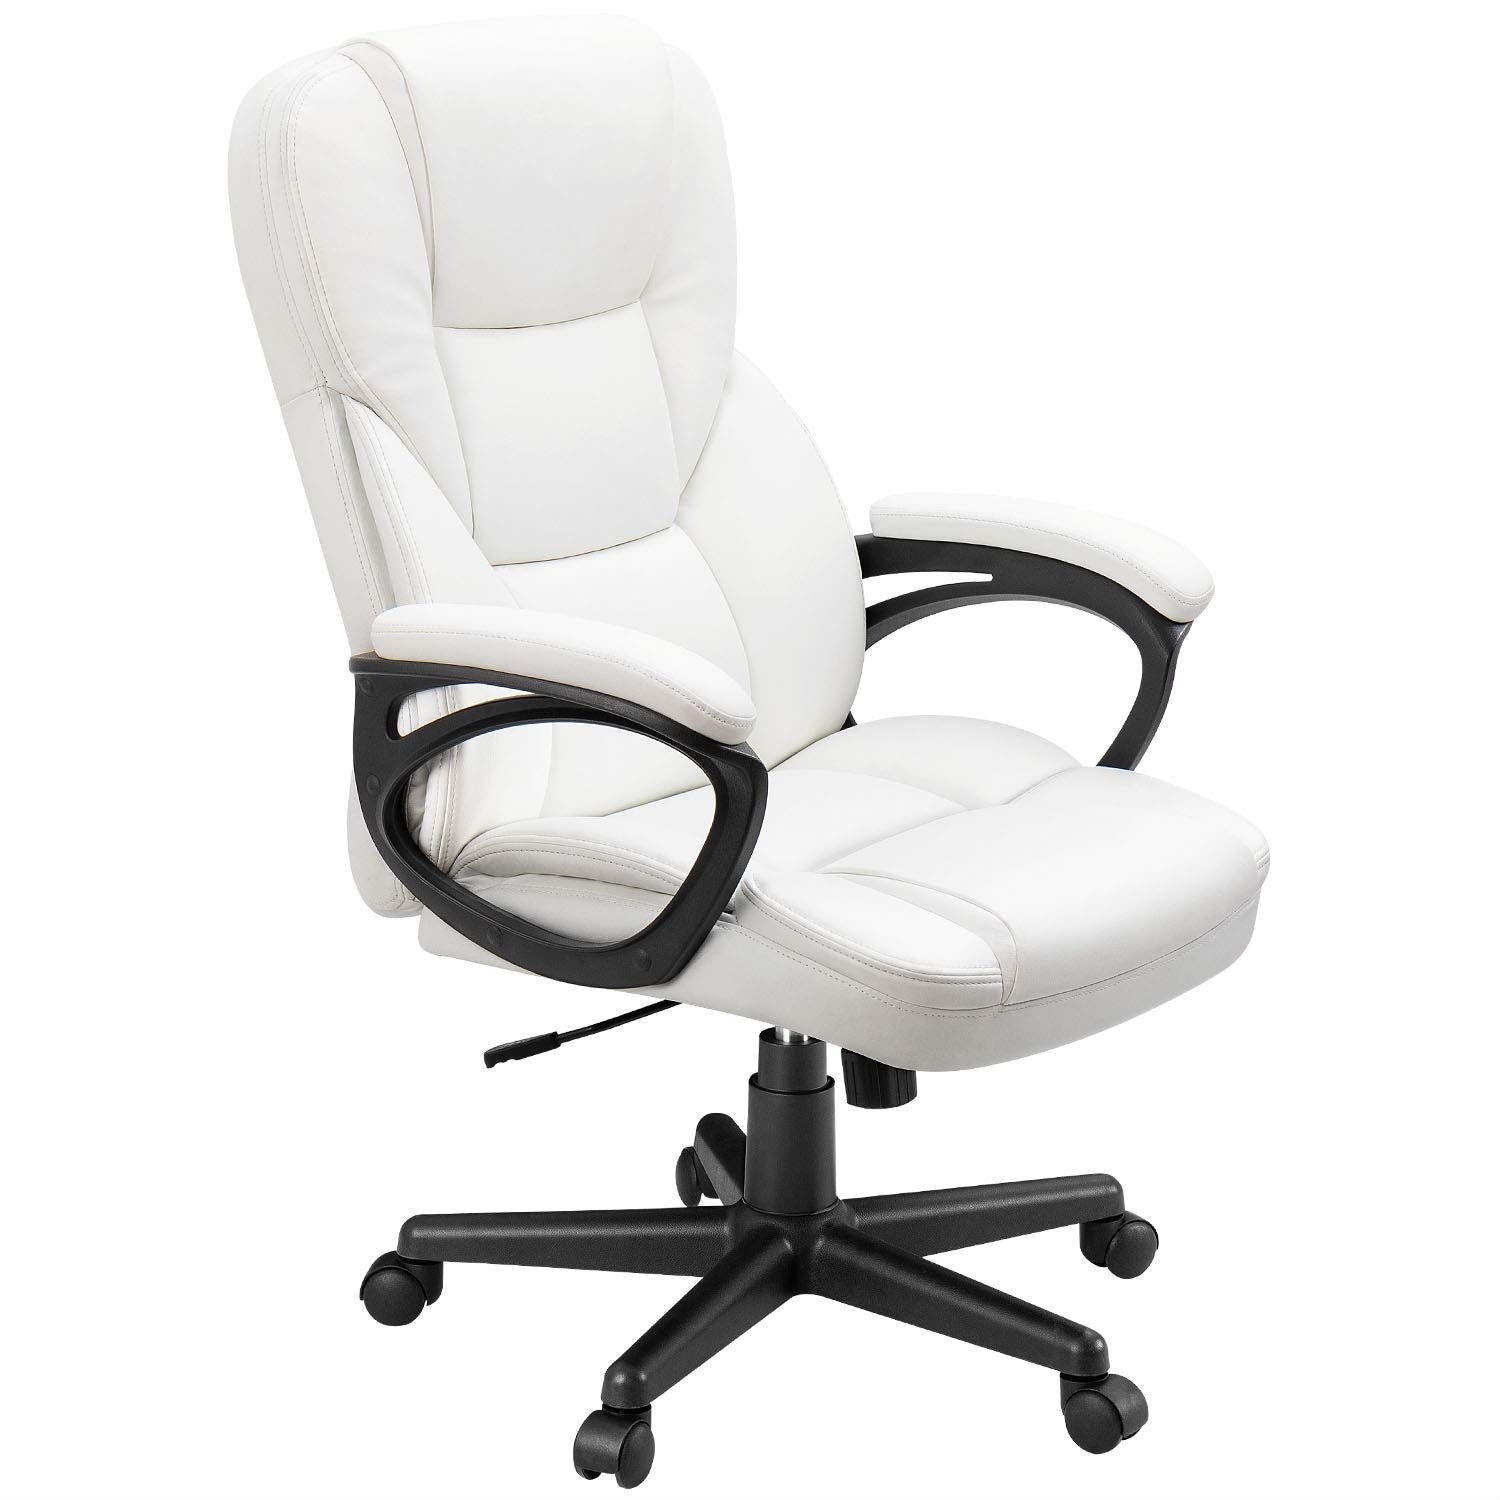 https://ak1.ostkcdn.com/images/products/is/images/direct/7a3077e495e1c9ee327baaf9d36e9d15a072a1c6/Homall-Office-Desk-Chair-High-Back-Exectuive-Ergonomic-Computer-Chair.jpg